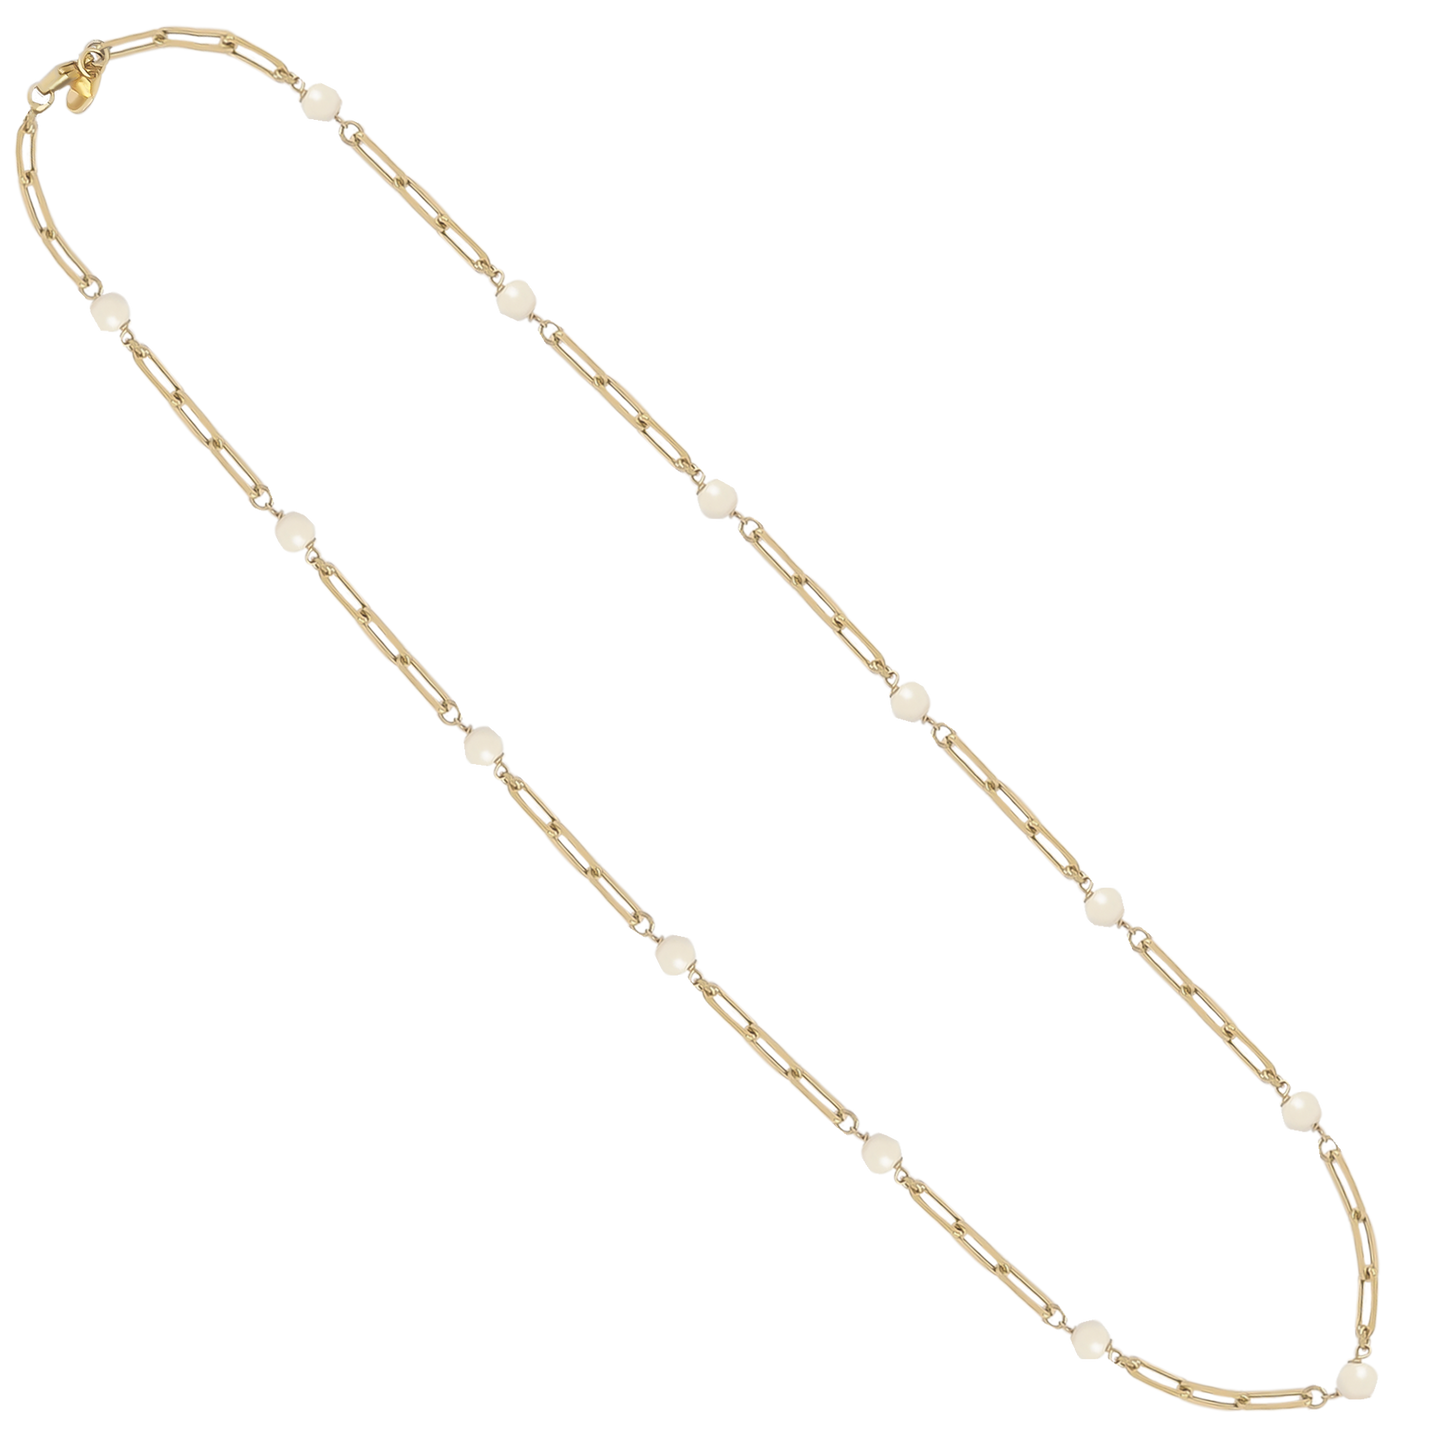 Natural Freshwater Pearl Necklace with a Paperclip Link in 9ct Yellow Gold